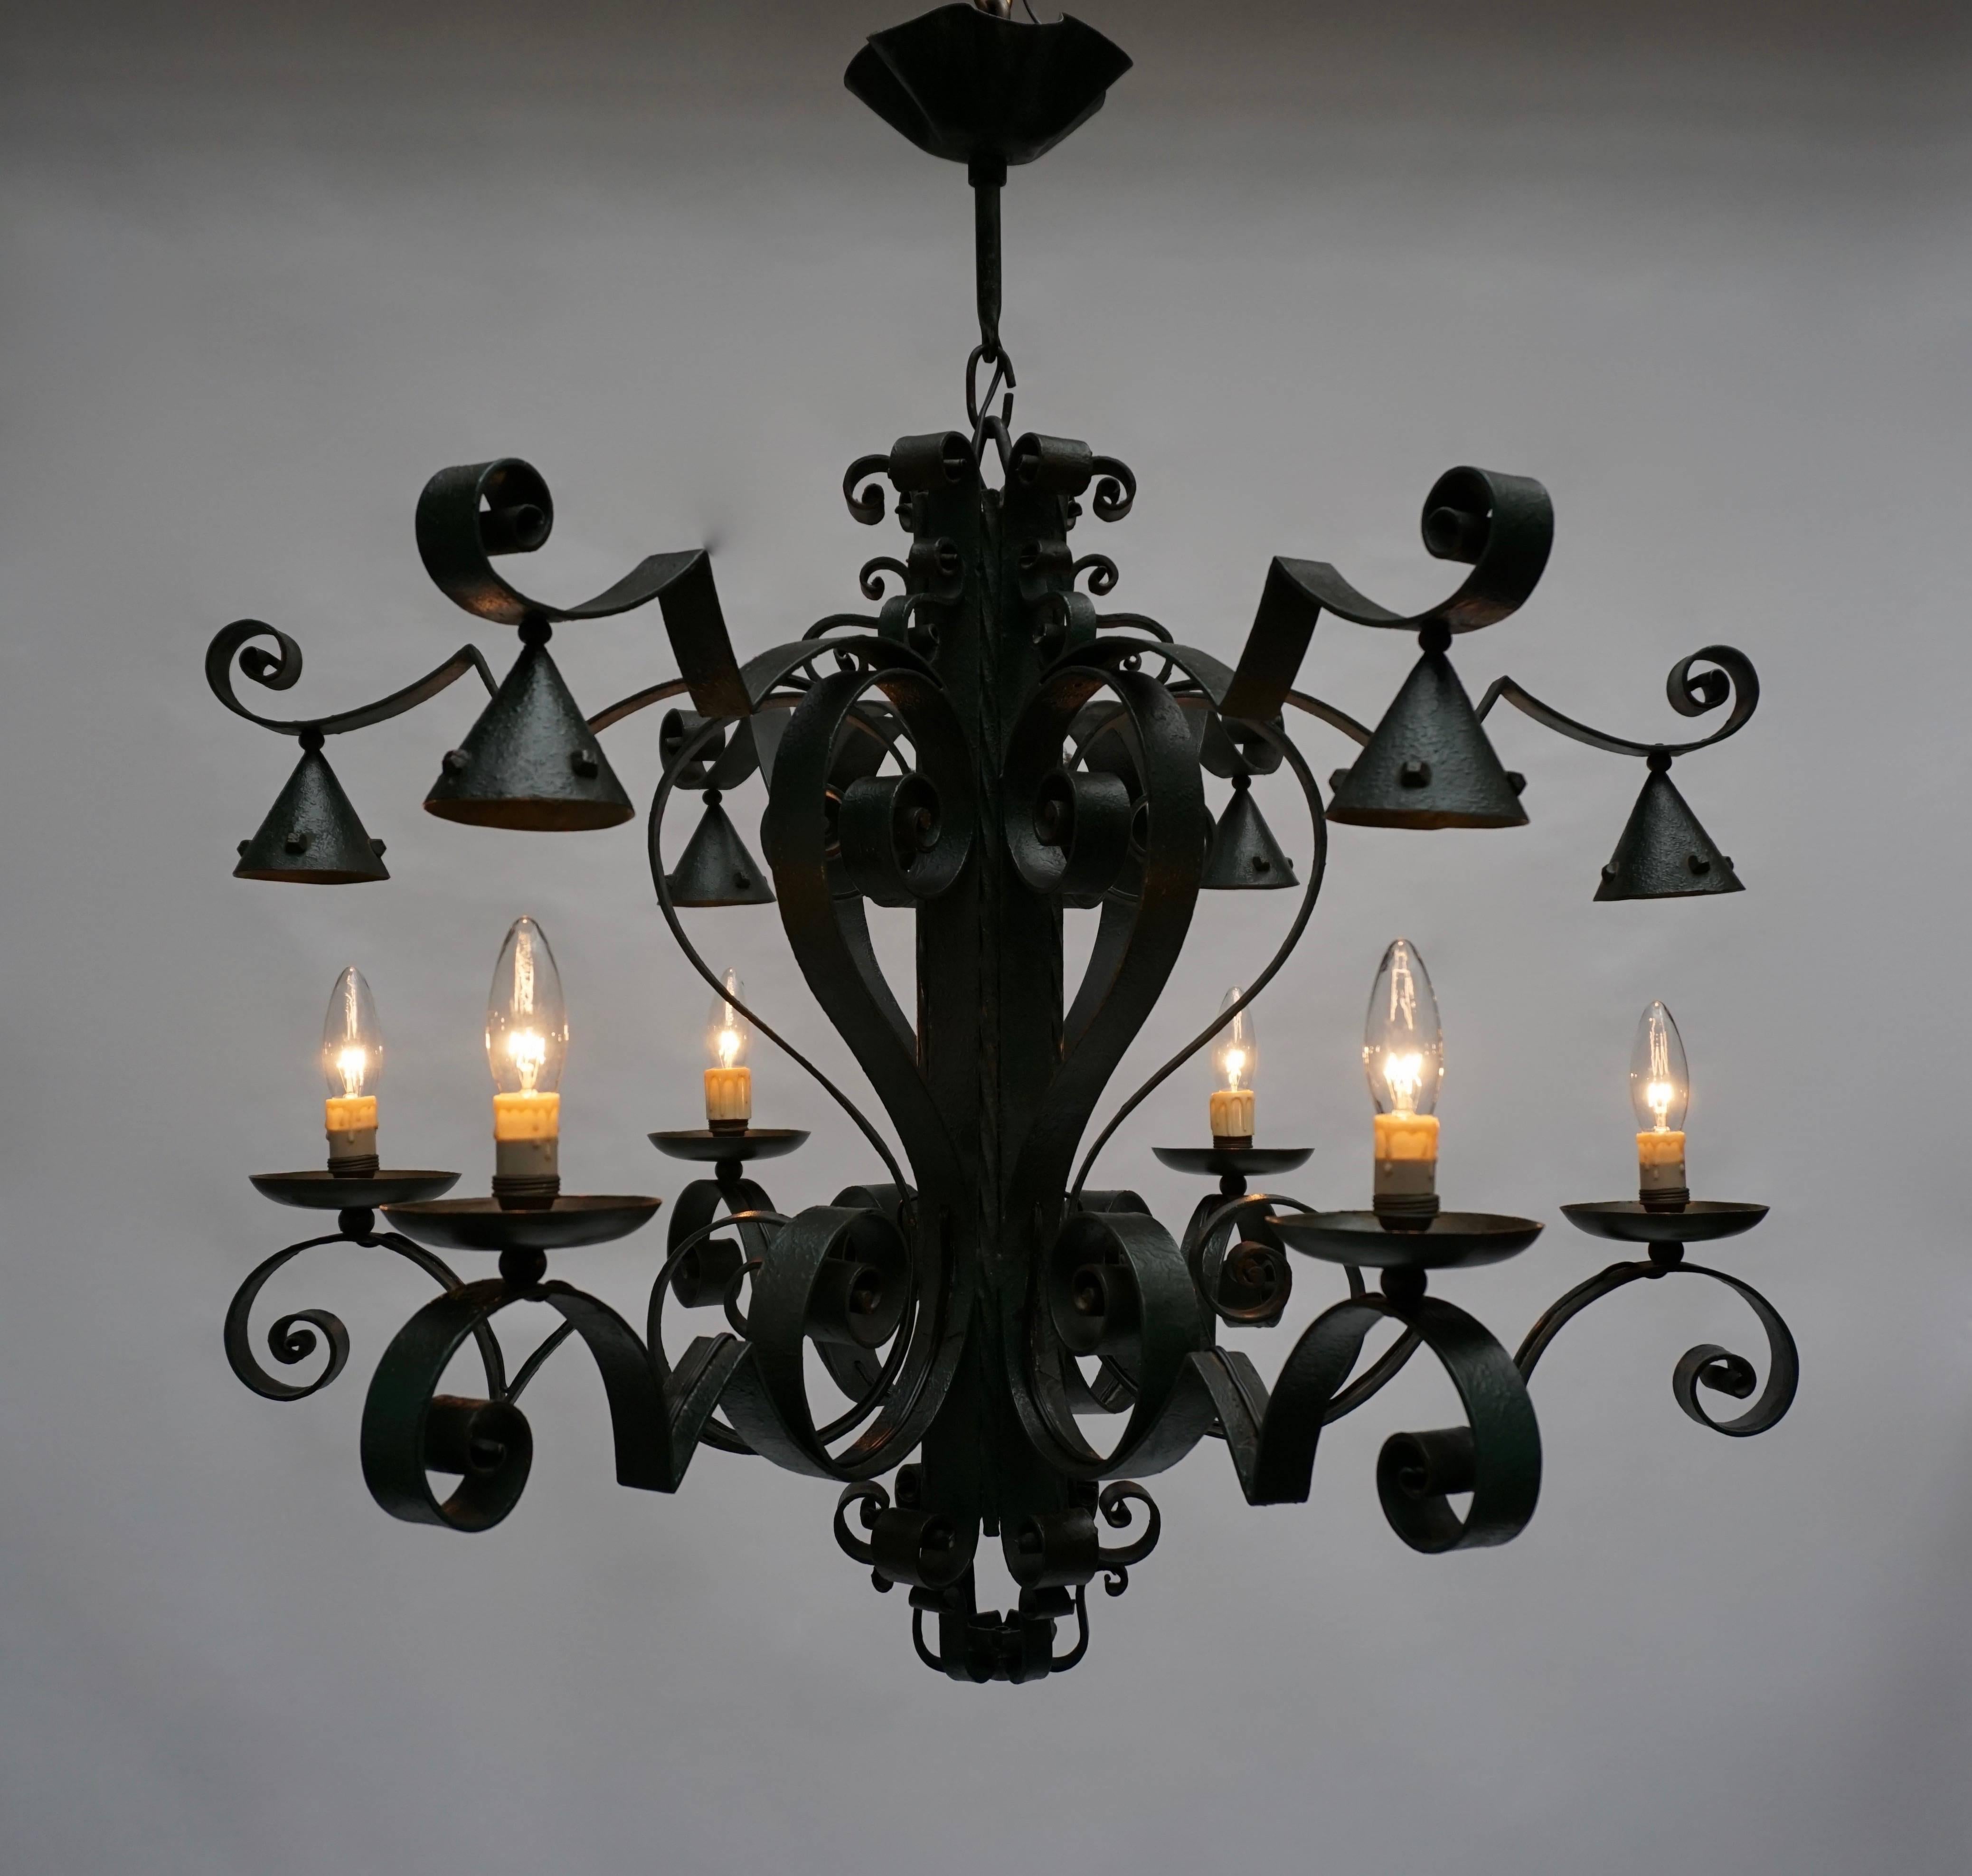 A large French six-light wrought iron chandelier. Beautifully crafted iron work and nice old patina.
More photos available upon request.

Measures: Diameter 80 cm.
Height 80 cm.
Maximum height with the original chain is 120 cm.